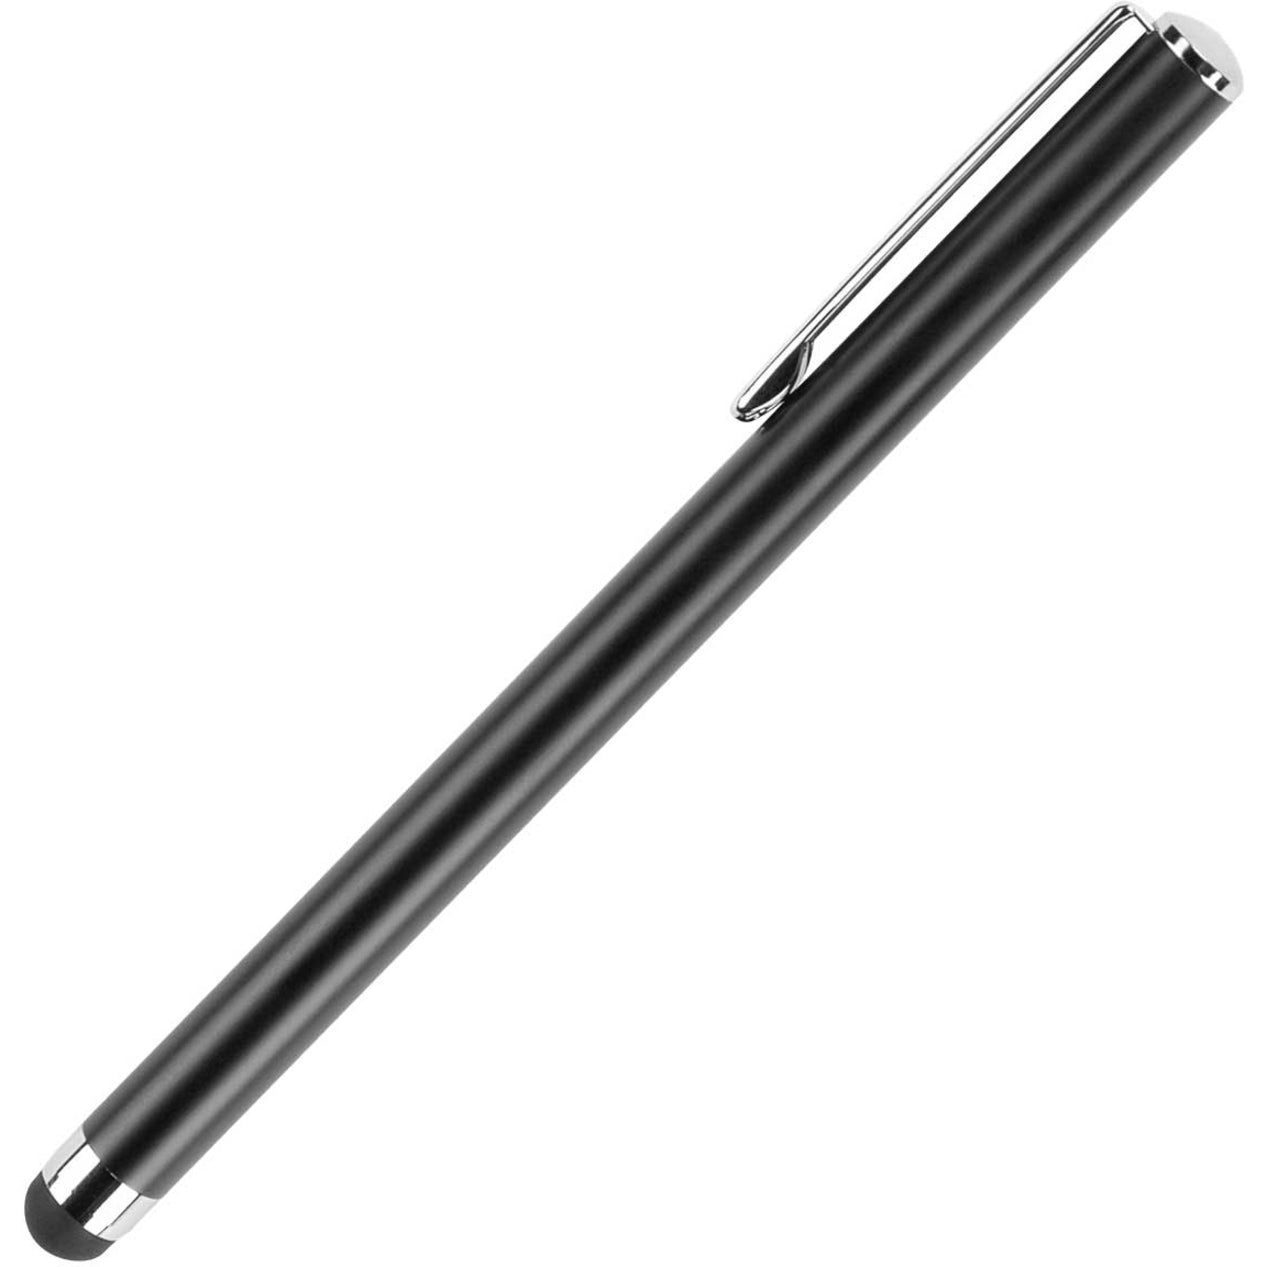 Targus AMM01TBUS Stylus for Tablets and Smartphones, Black